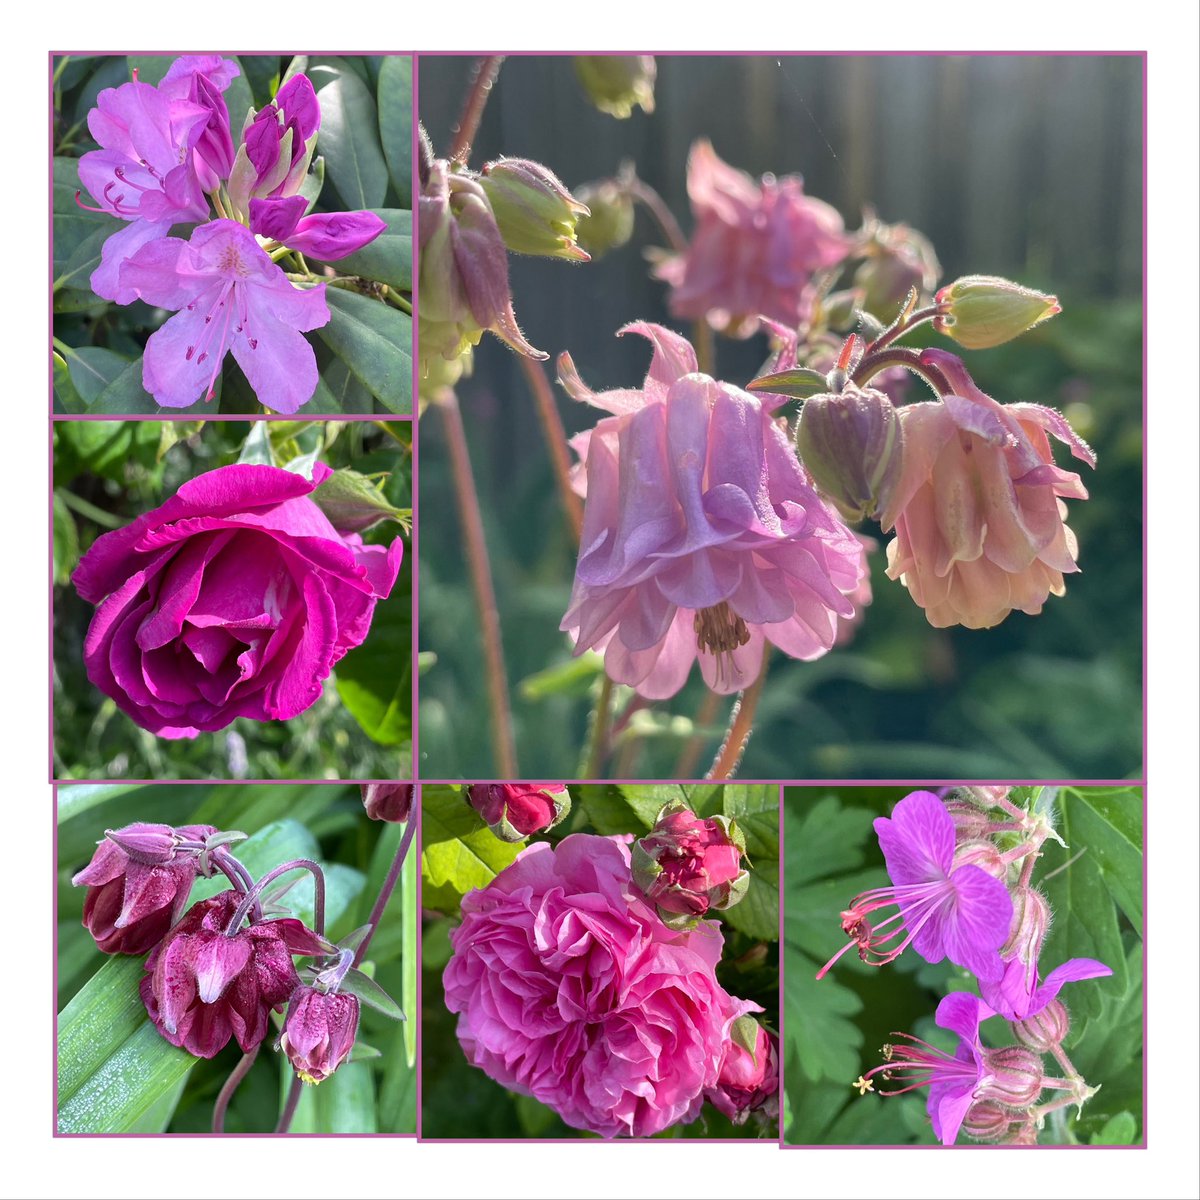 Today’s #SixOnSaturday with a little morning dew on a beautiful sunny day. The first roses are in bloom, as is the rhododendron, joined by columbines and cranesbill. I wish you all a wonderful weekend!🥀🌞